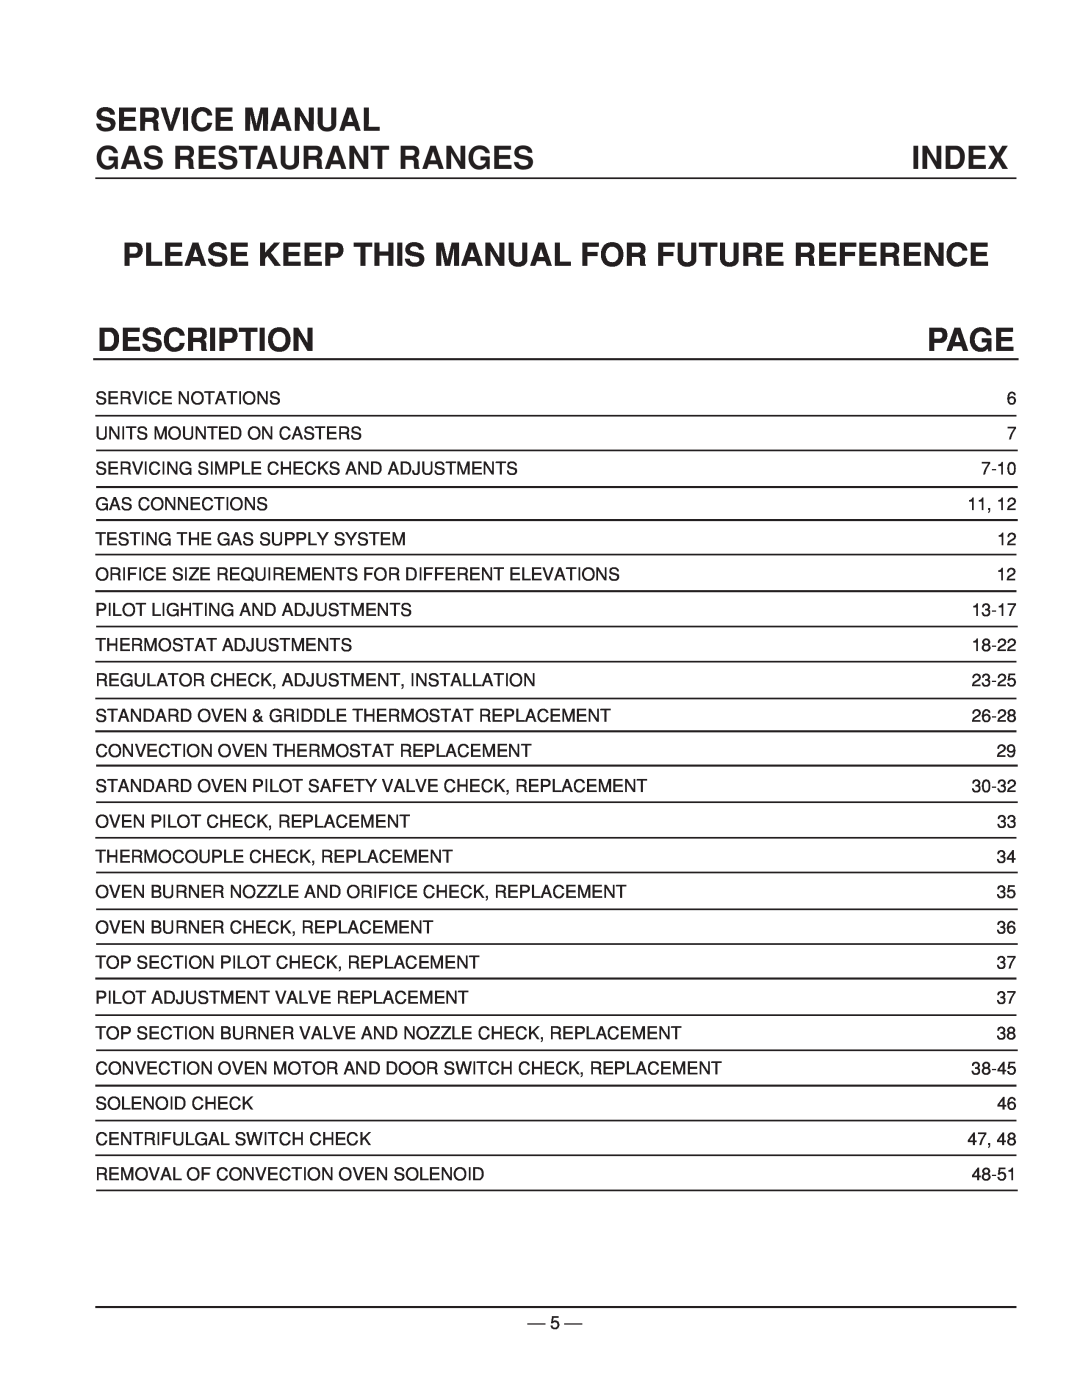 Vulcan-Hart ML-52949 Service Manual, Gas Restaurant Ranges, Index, Please Keep This Manual For Future Reference, Page 